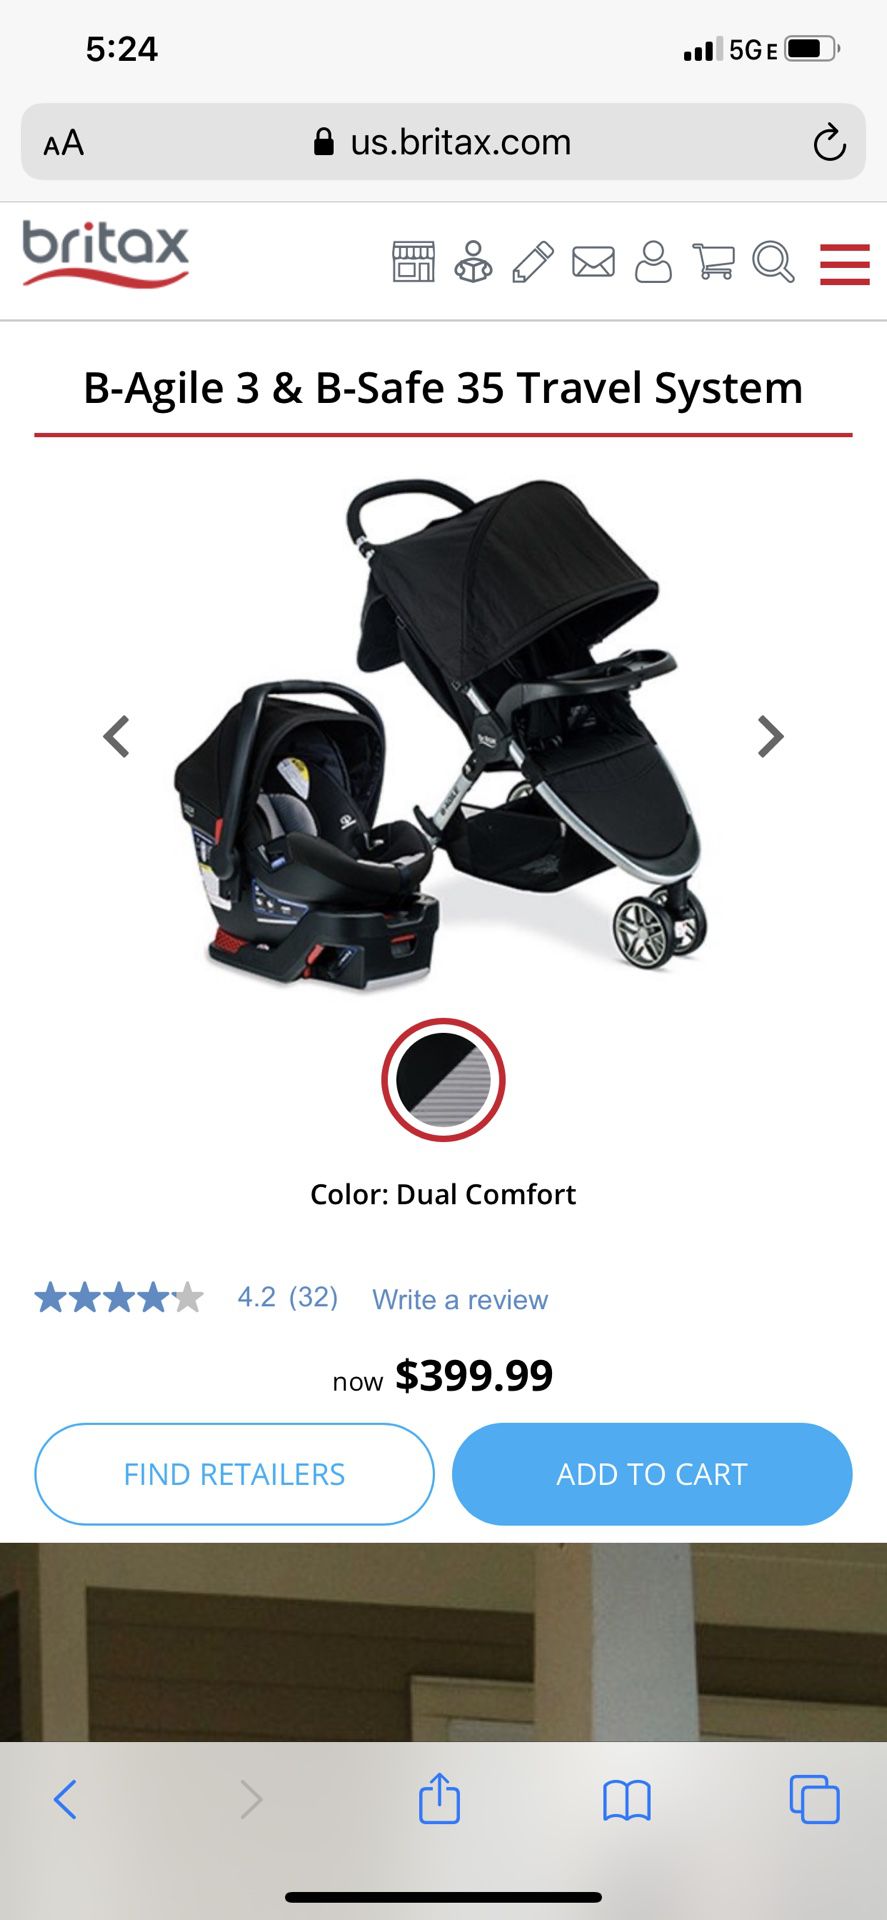 Britax travel system (stroller, base and car seat)